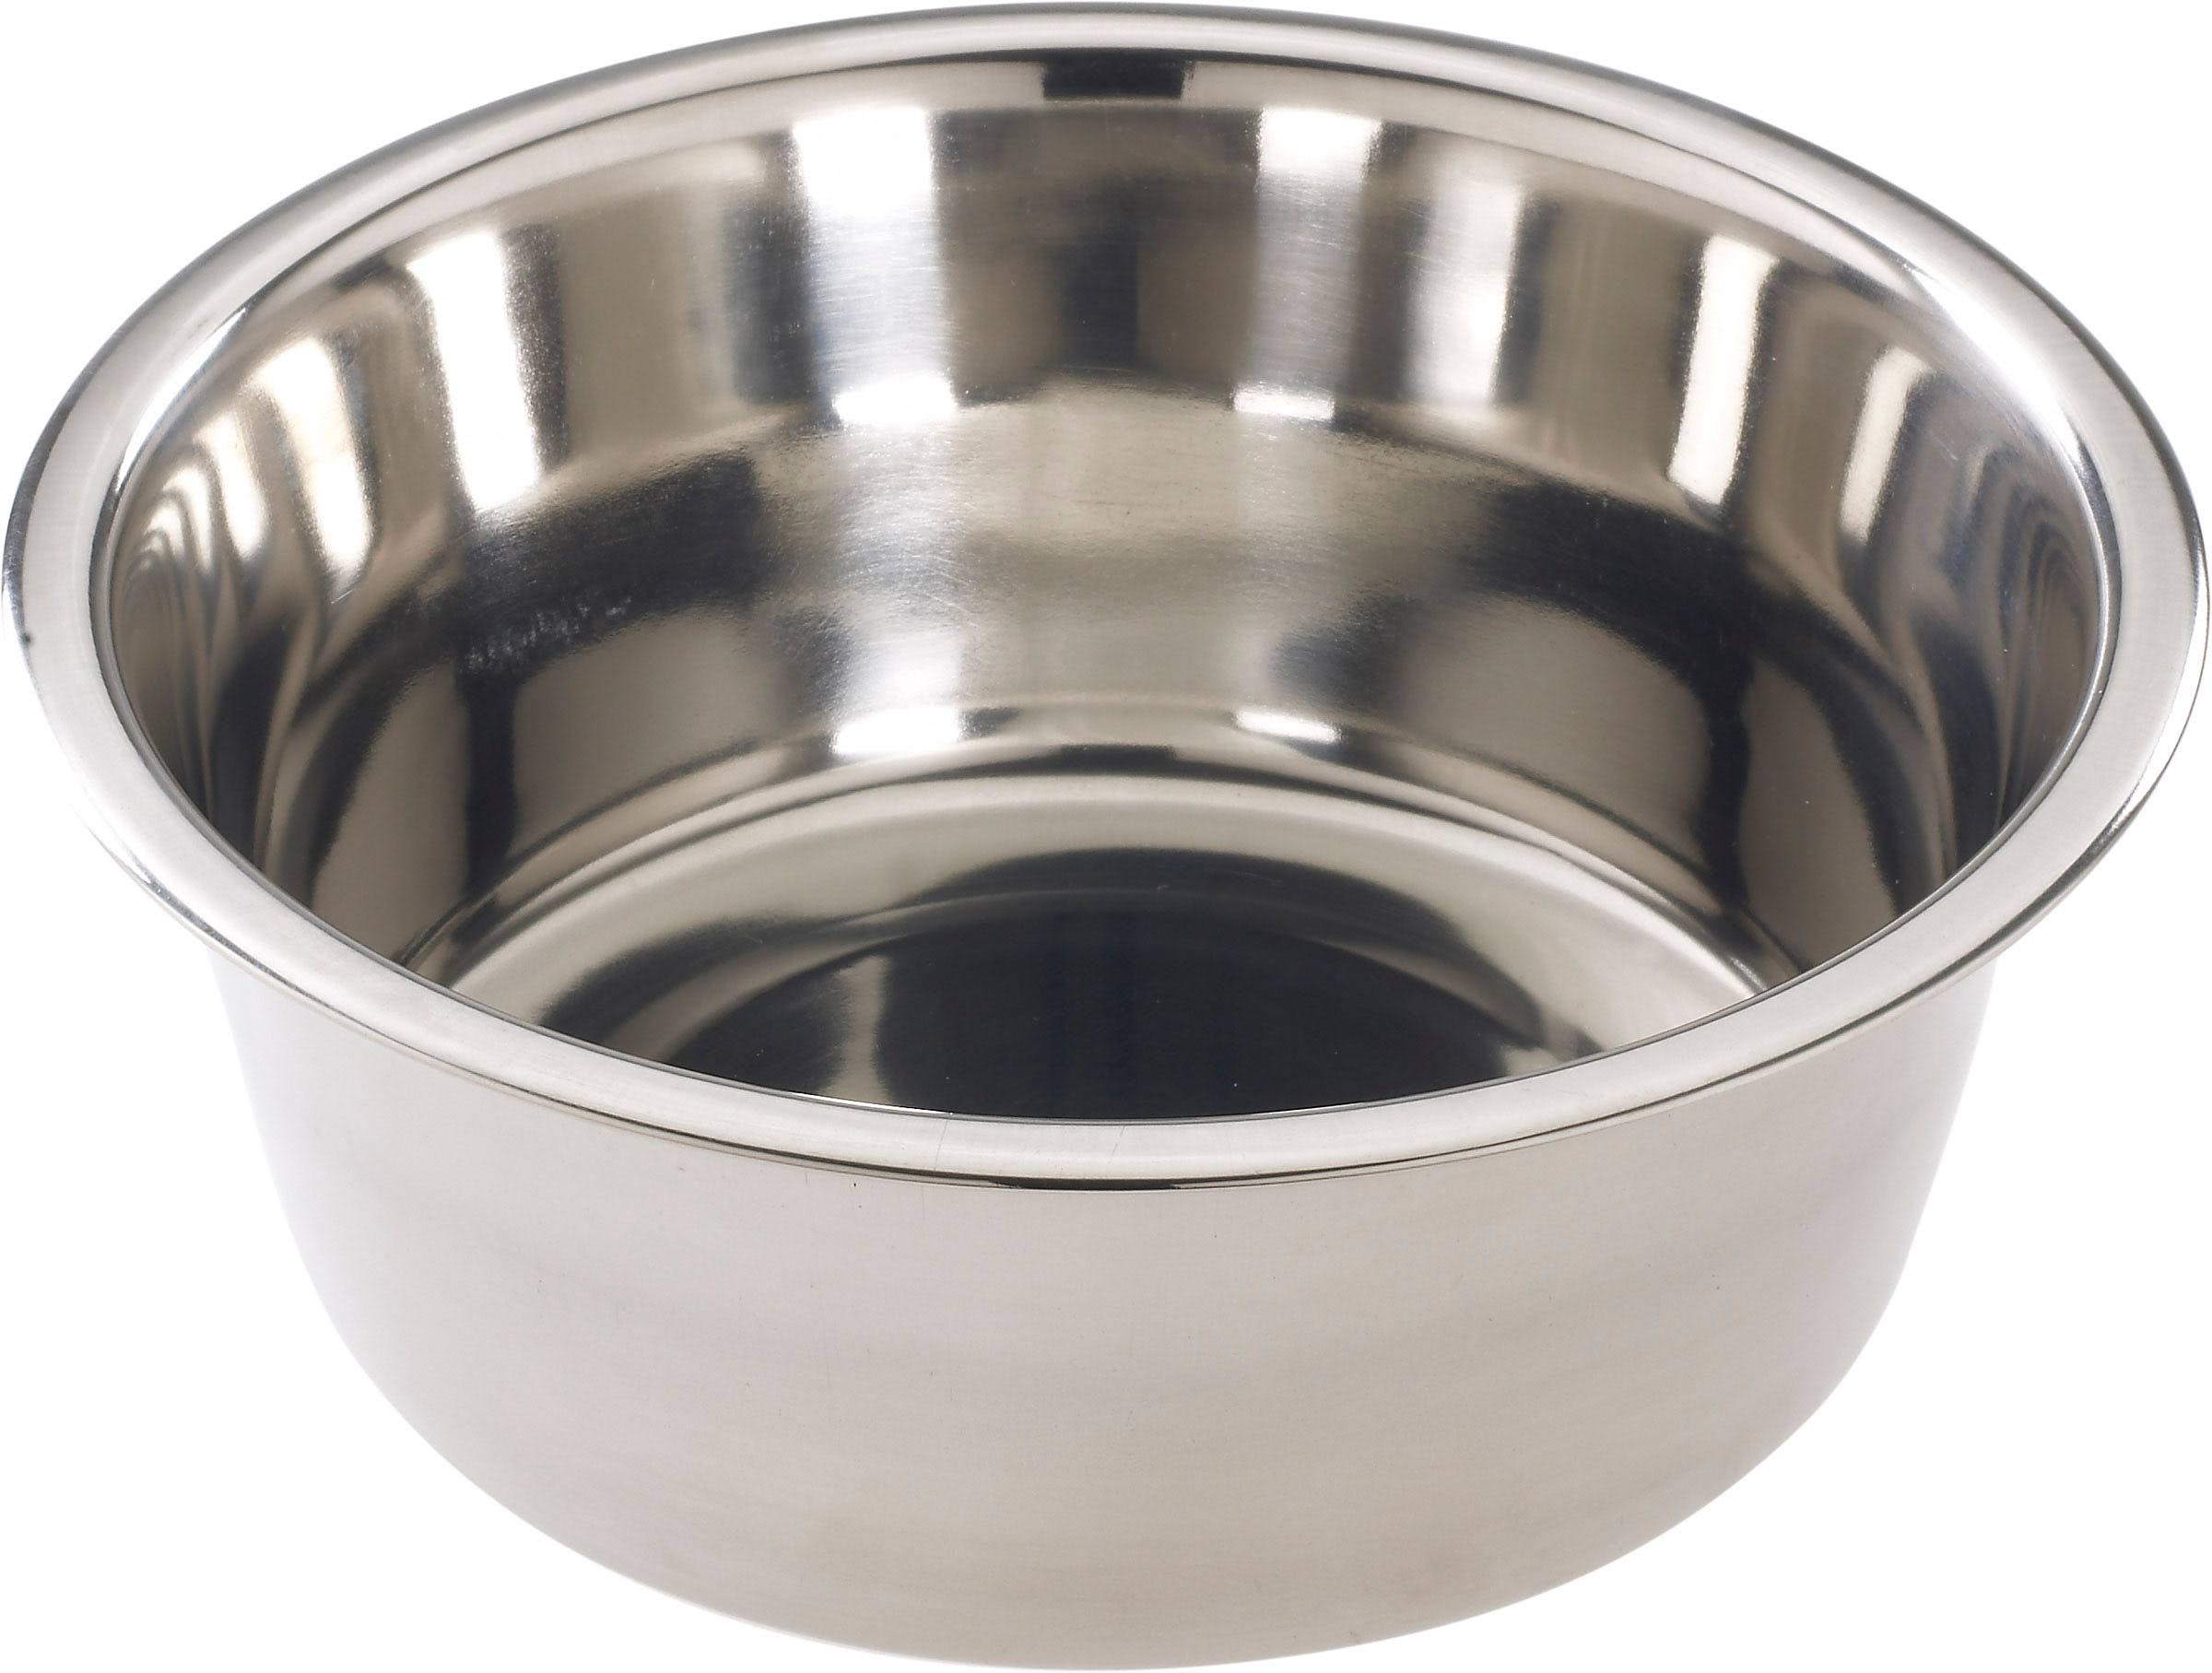 TopDawg Pet Supply Pet Dish - Stainless Steel, Mirror Finish